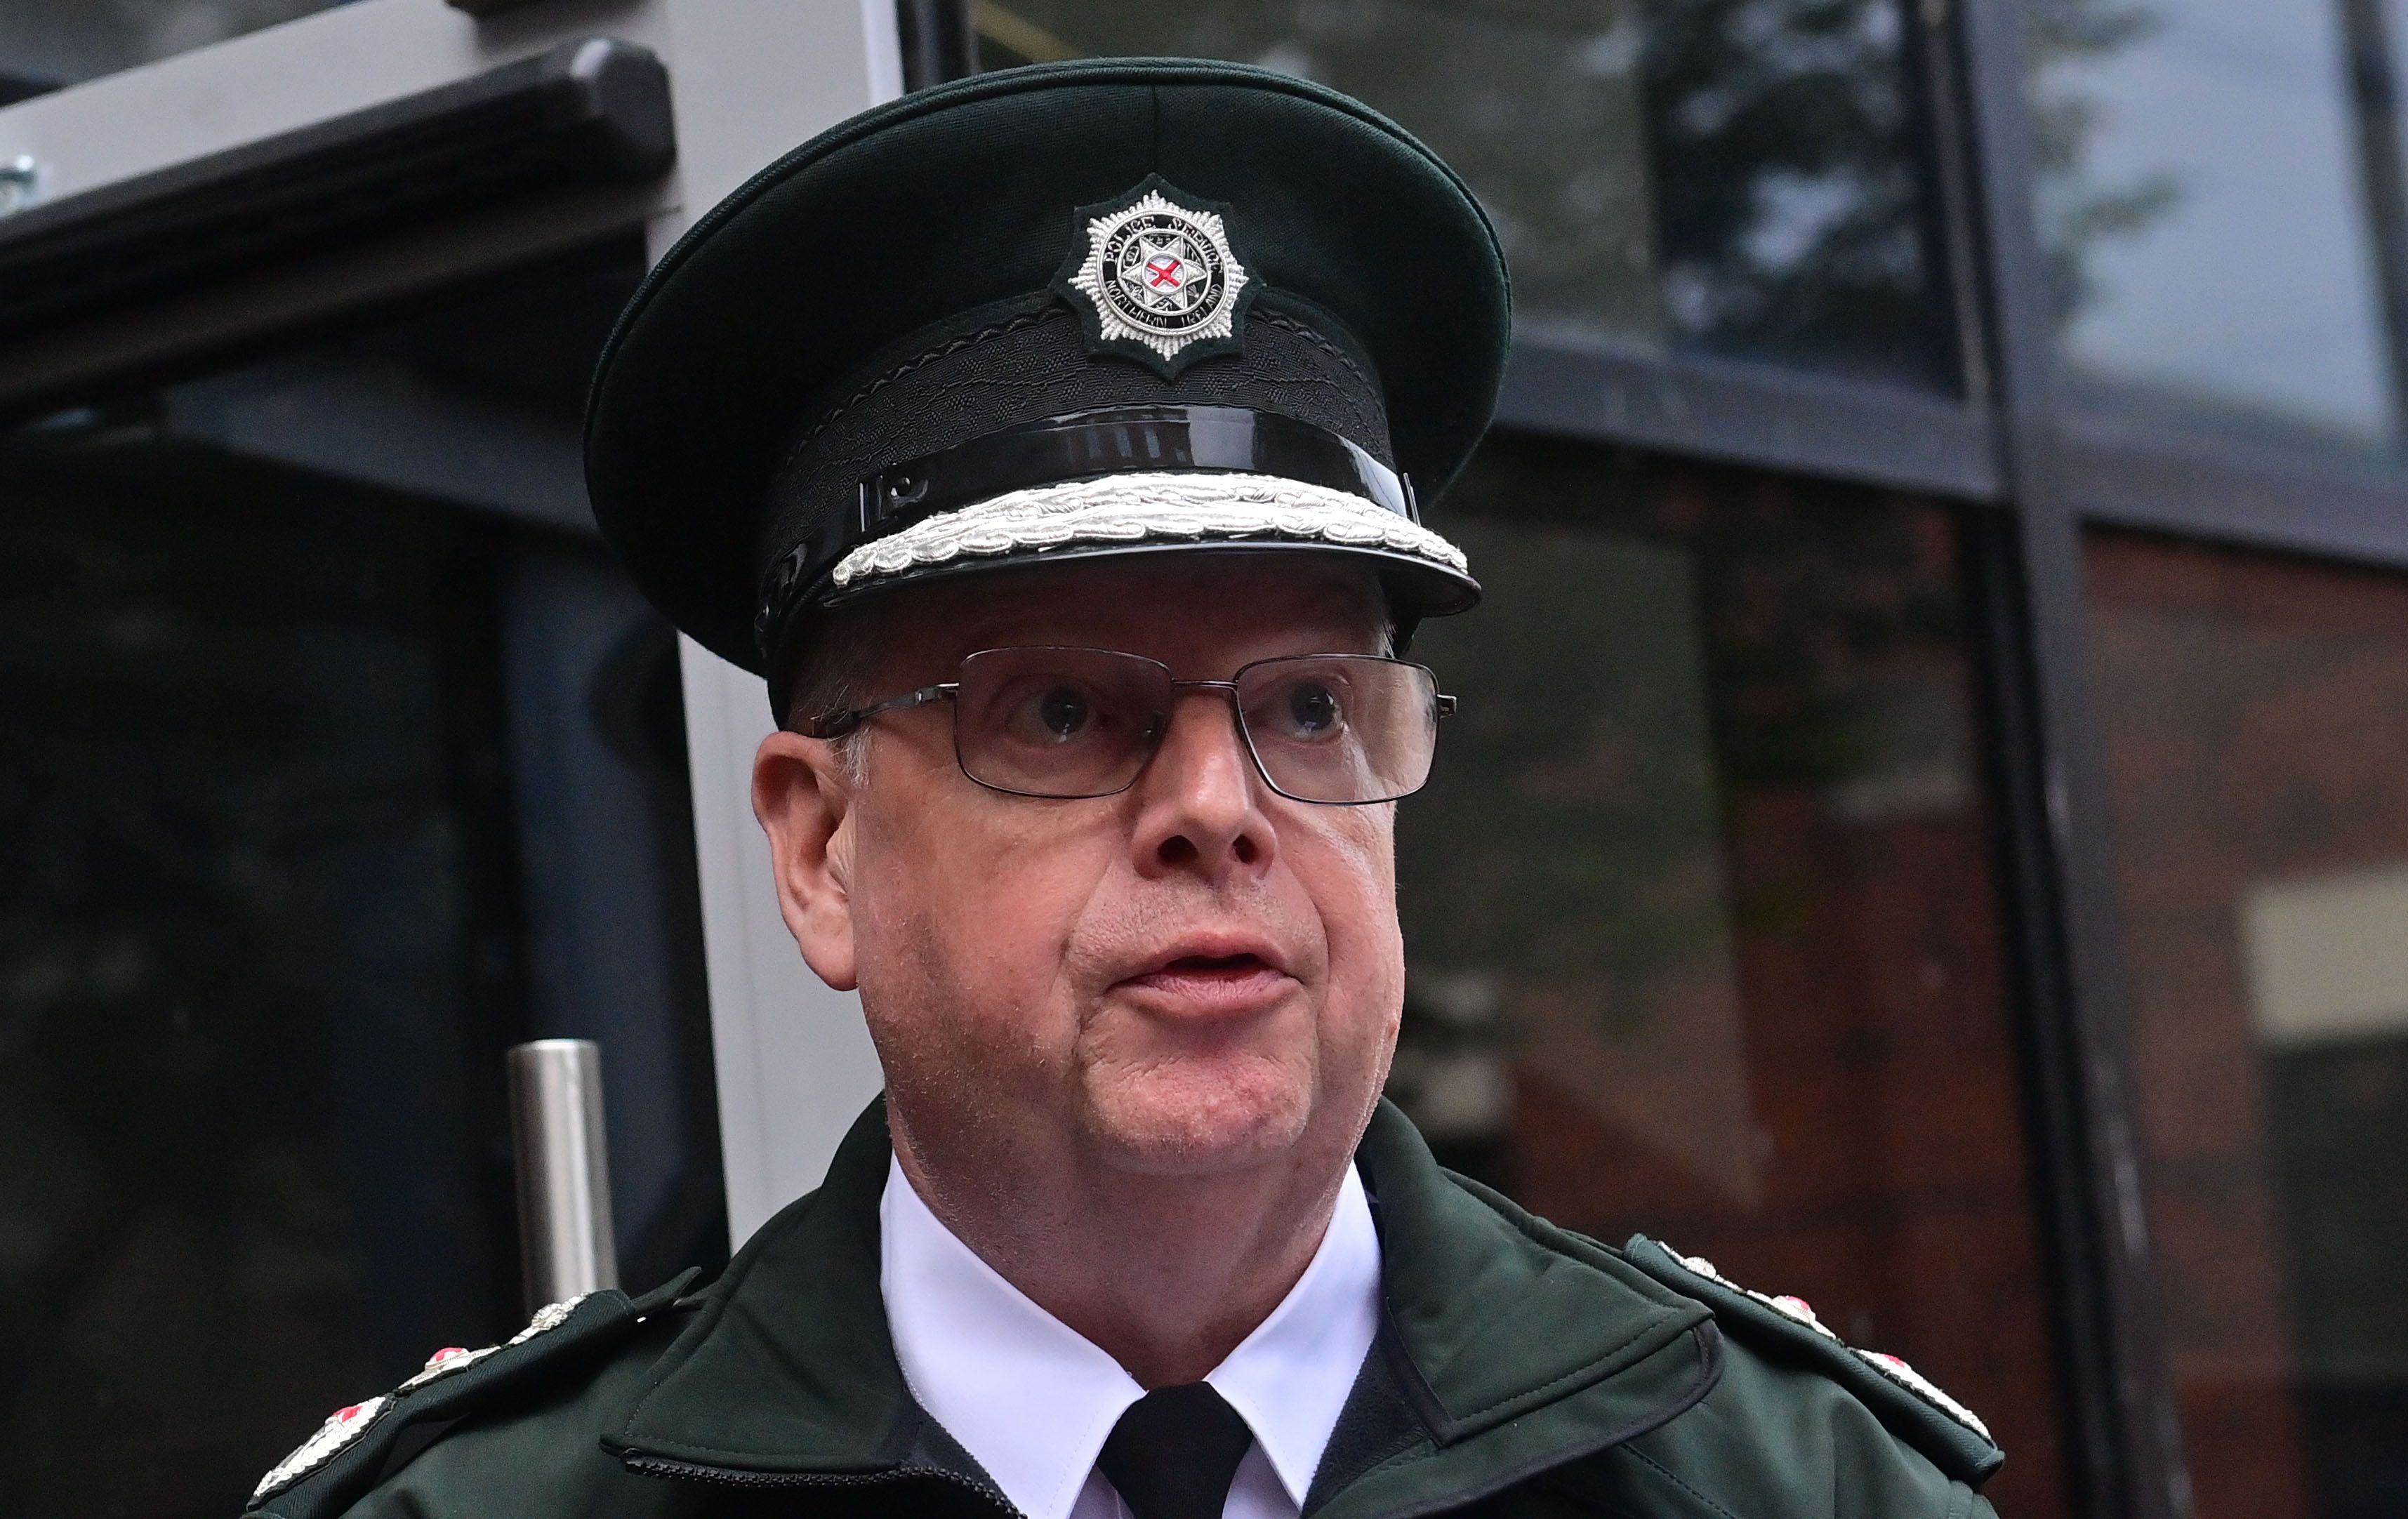 ADIEU: Simon Byrne stepped down as PSNI Chief Constable after a torrid tenure